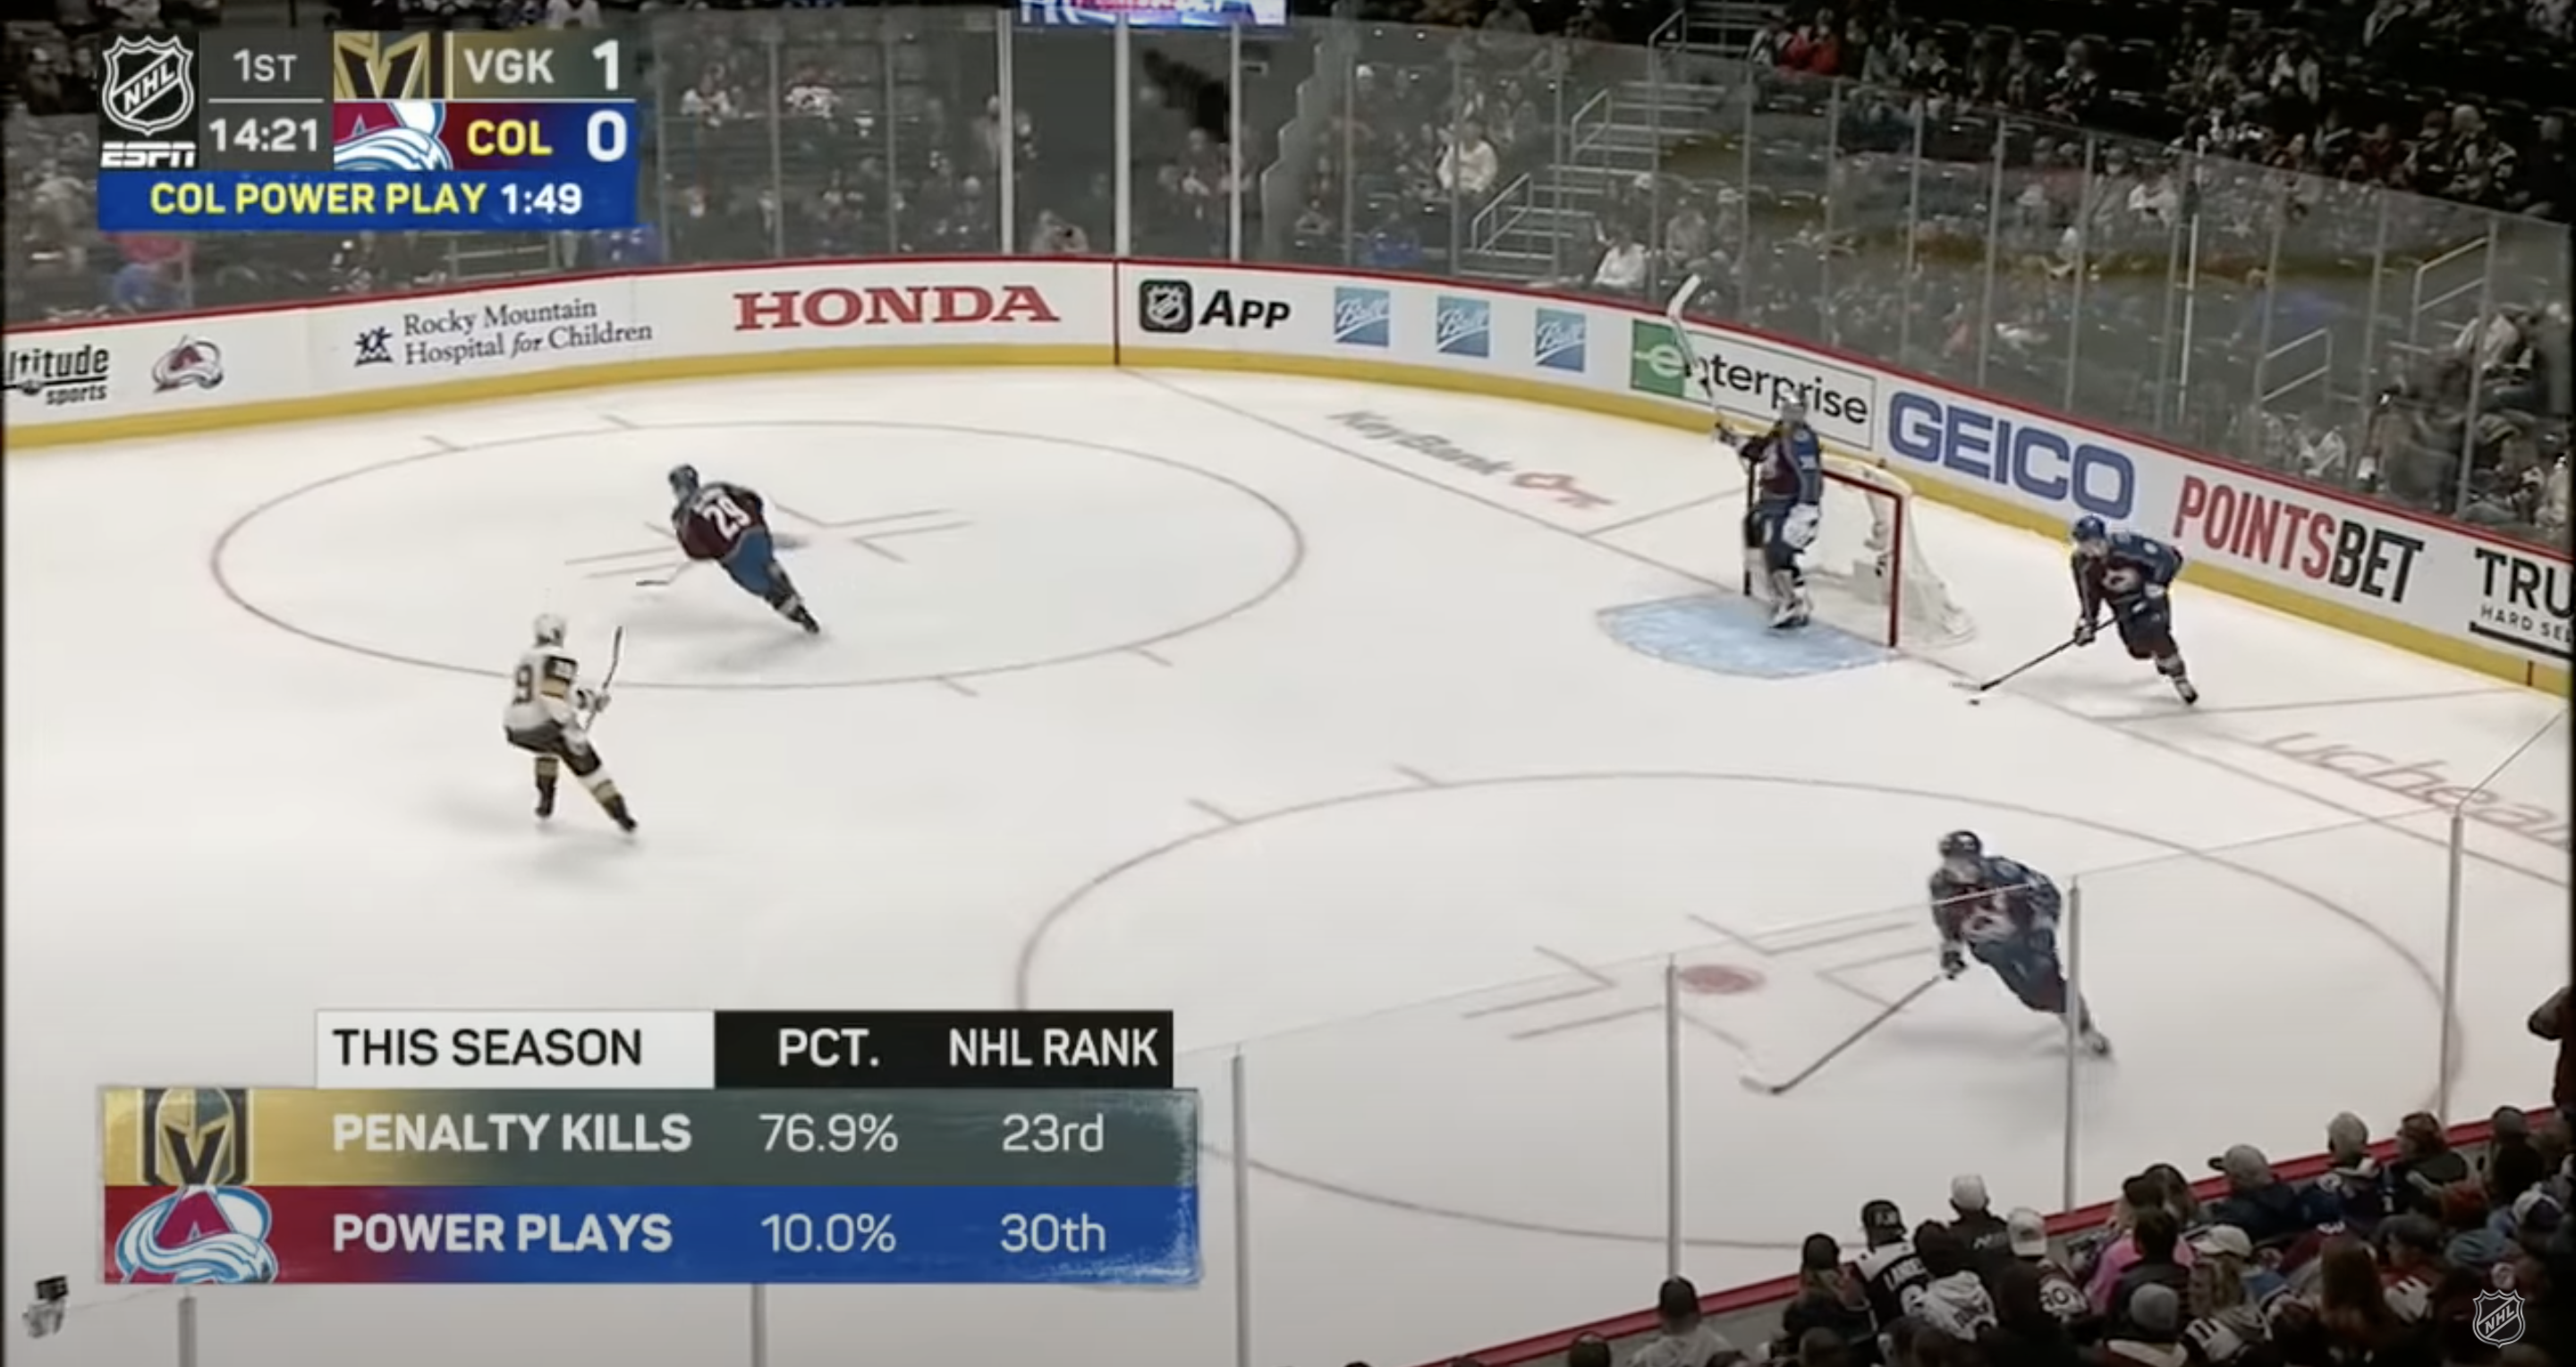 ESPN's return to NHL broadcasting showed a lot of potential